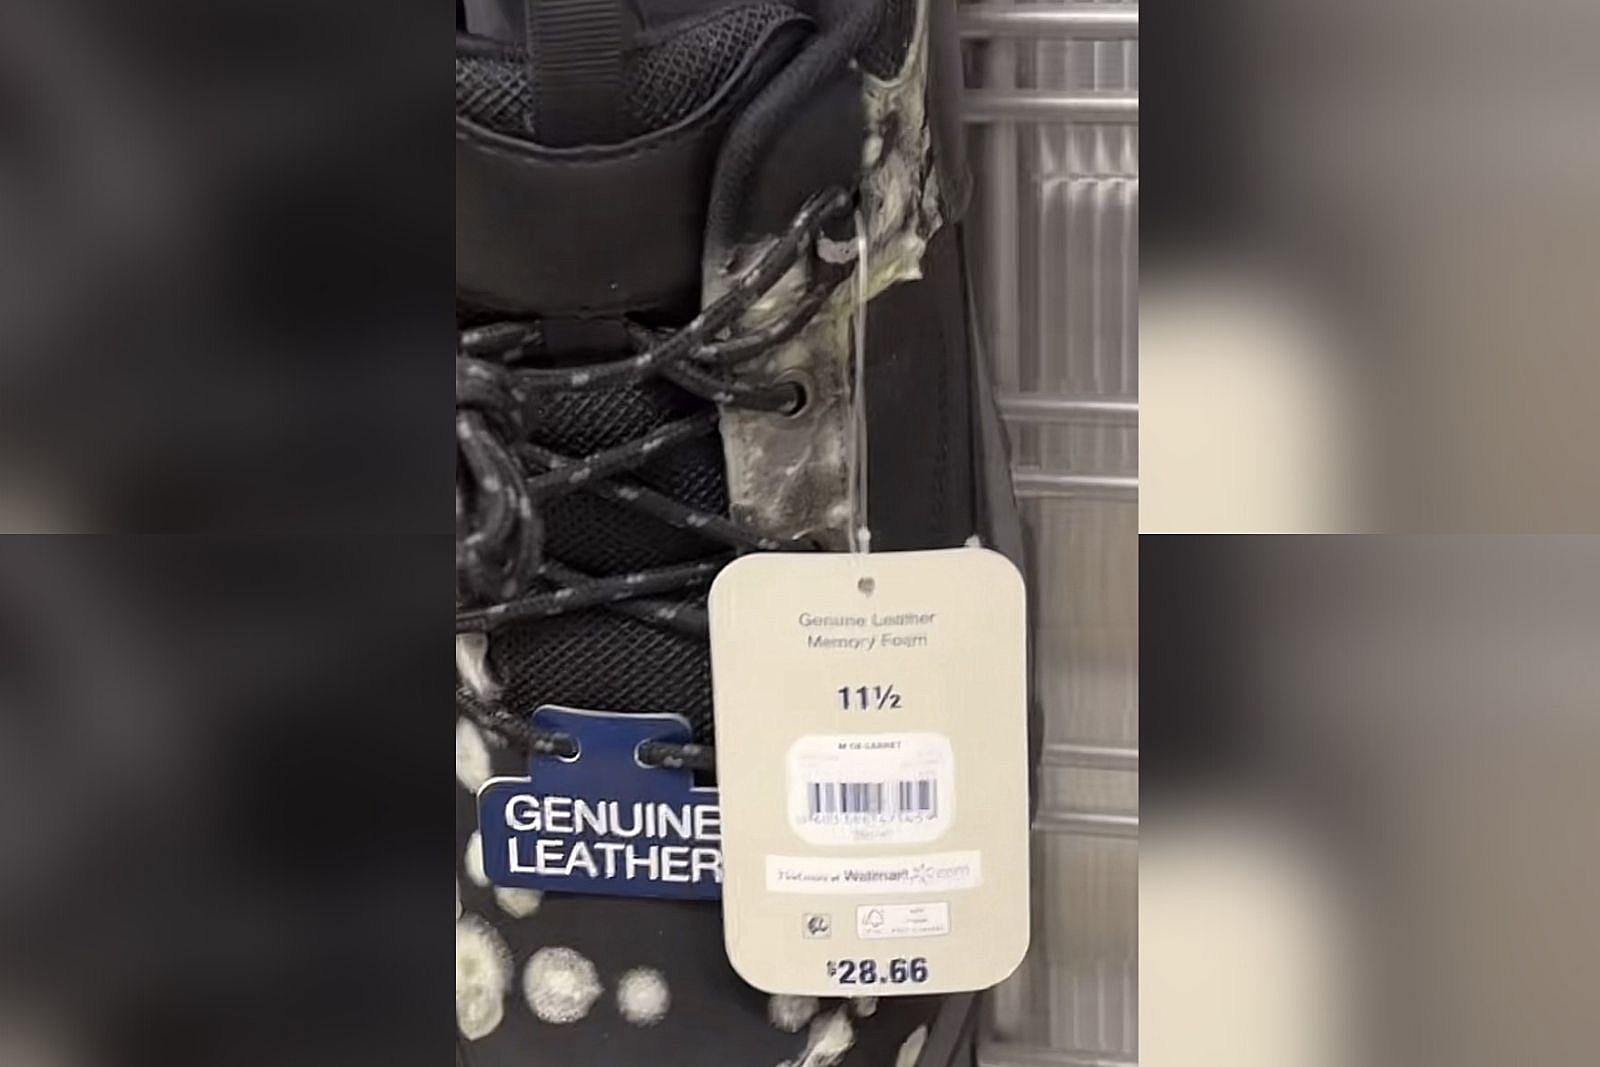 12 Lan Xxxxx Videos School Ghral - Viral Tik Tok Video Shows Moldy Shoes for Sale Inside Wal-Mart